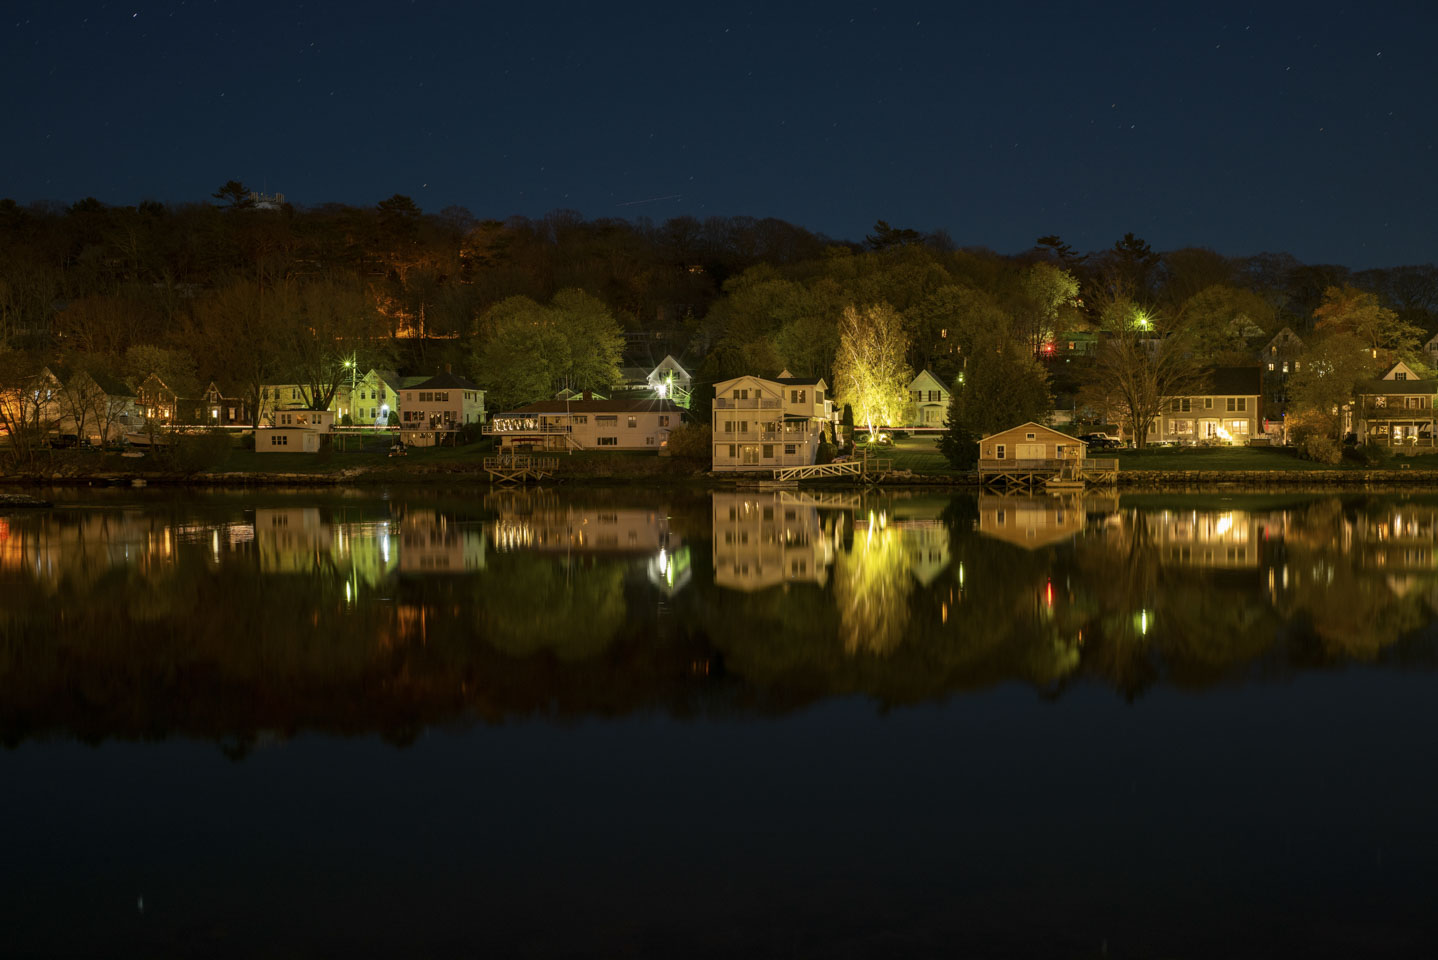 Houses on the edge of Boothbay Harbor at night.